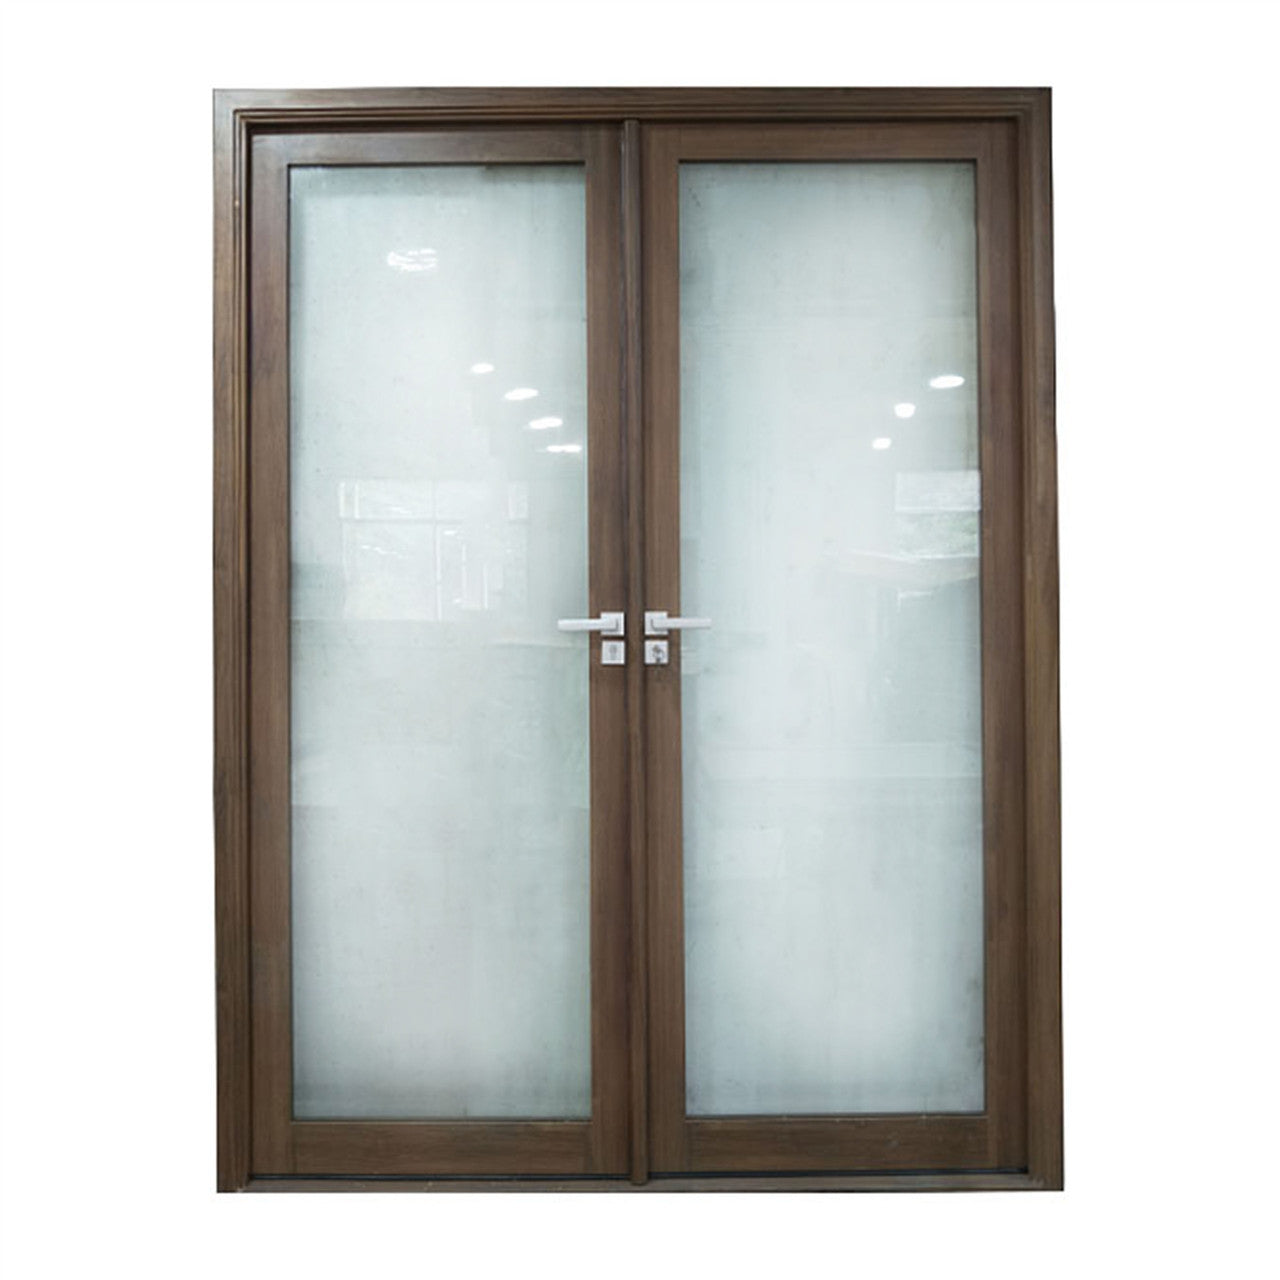 Aleko Aluminum Square Top Minimalist Glass-Panel Interior Double Door with Frame - 84 x 96 inches - Chestnut ALD8496W10-AP - Serenity Provision